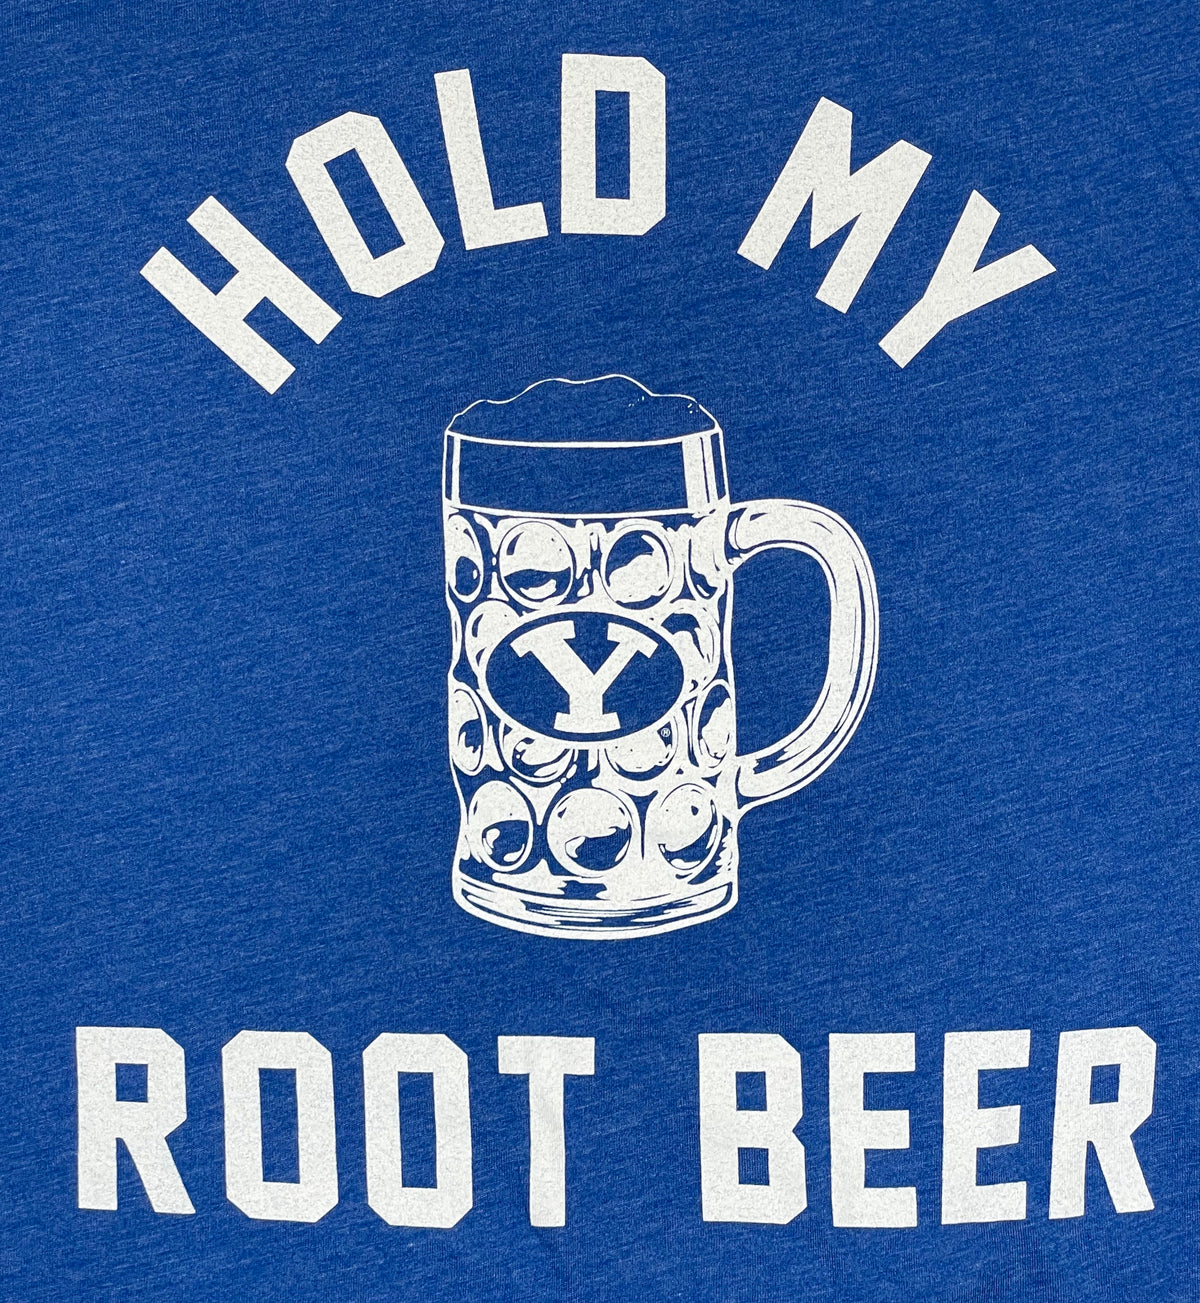 Hold My Root Beer T-Shirt - Royal and White